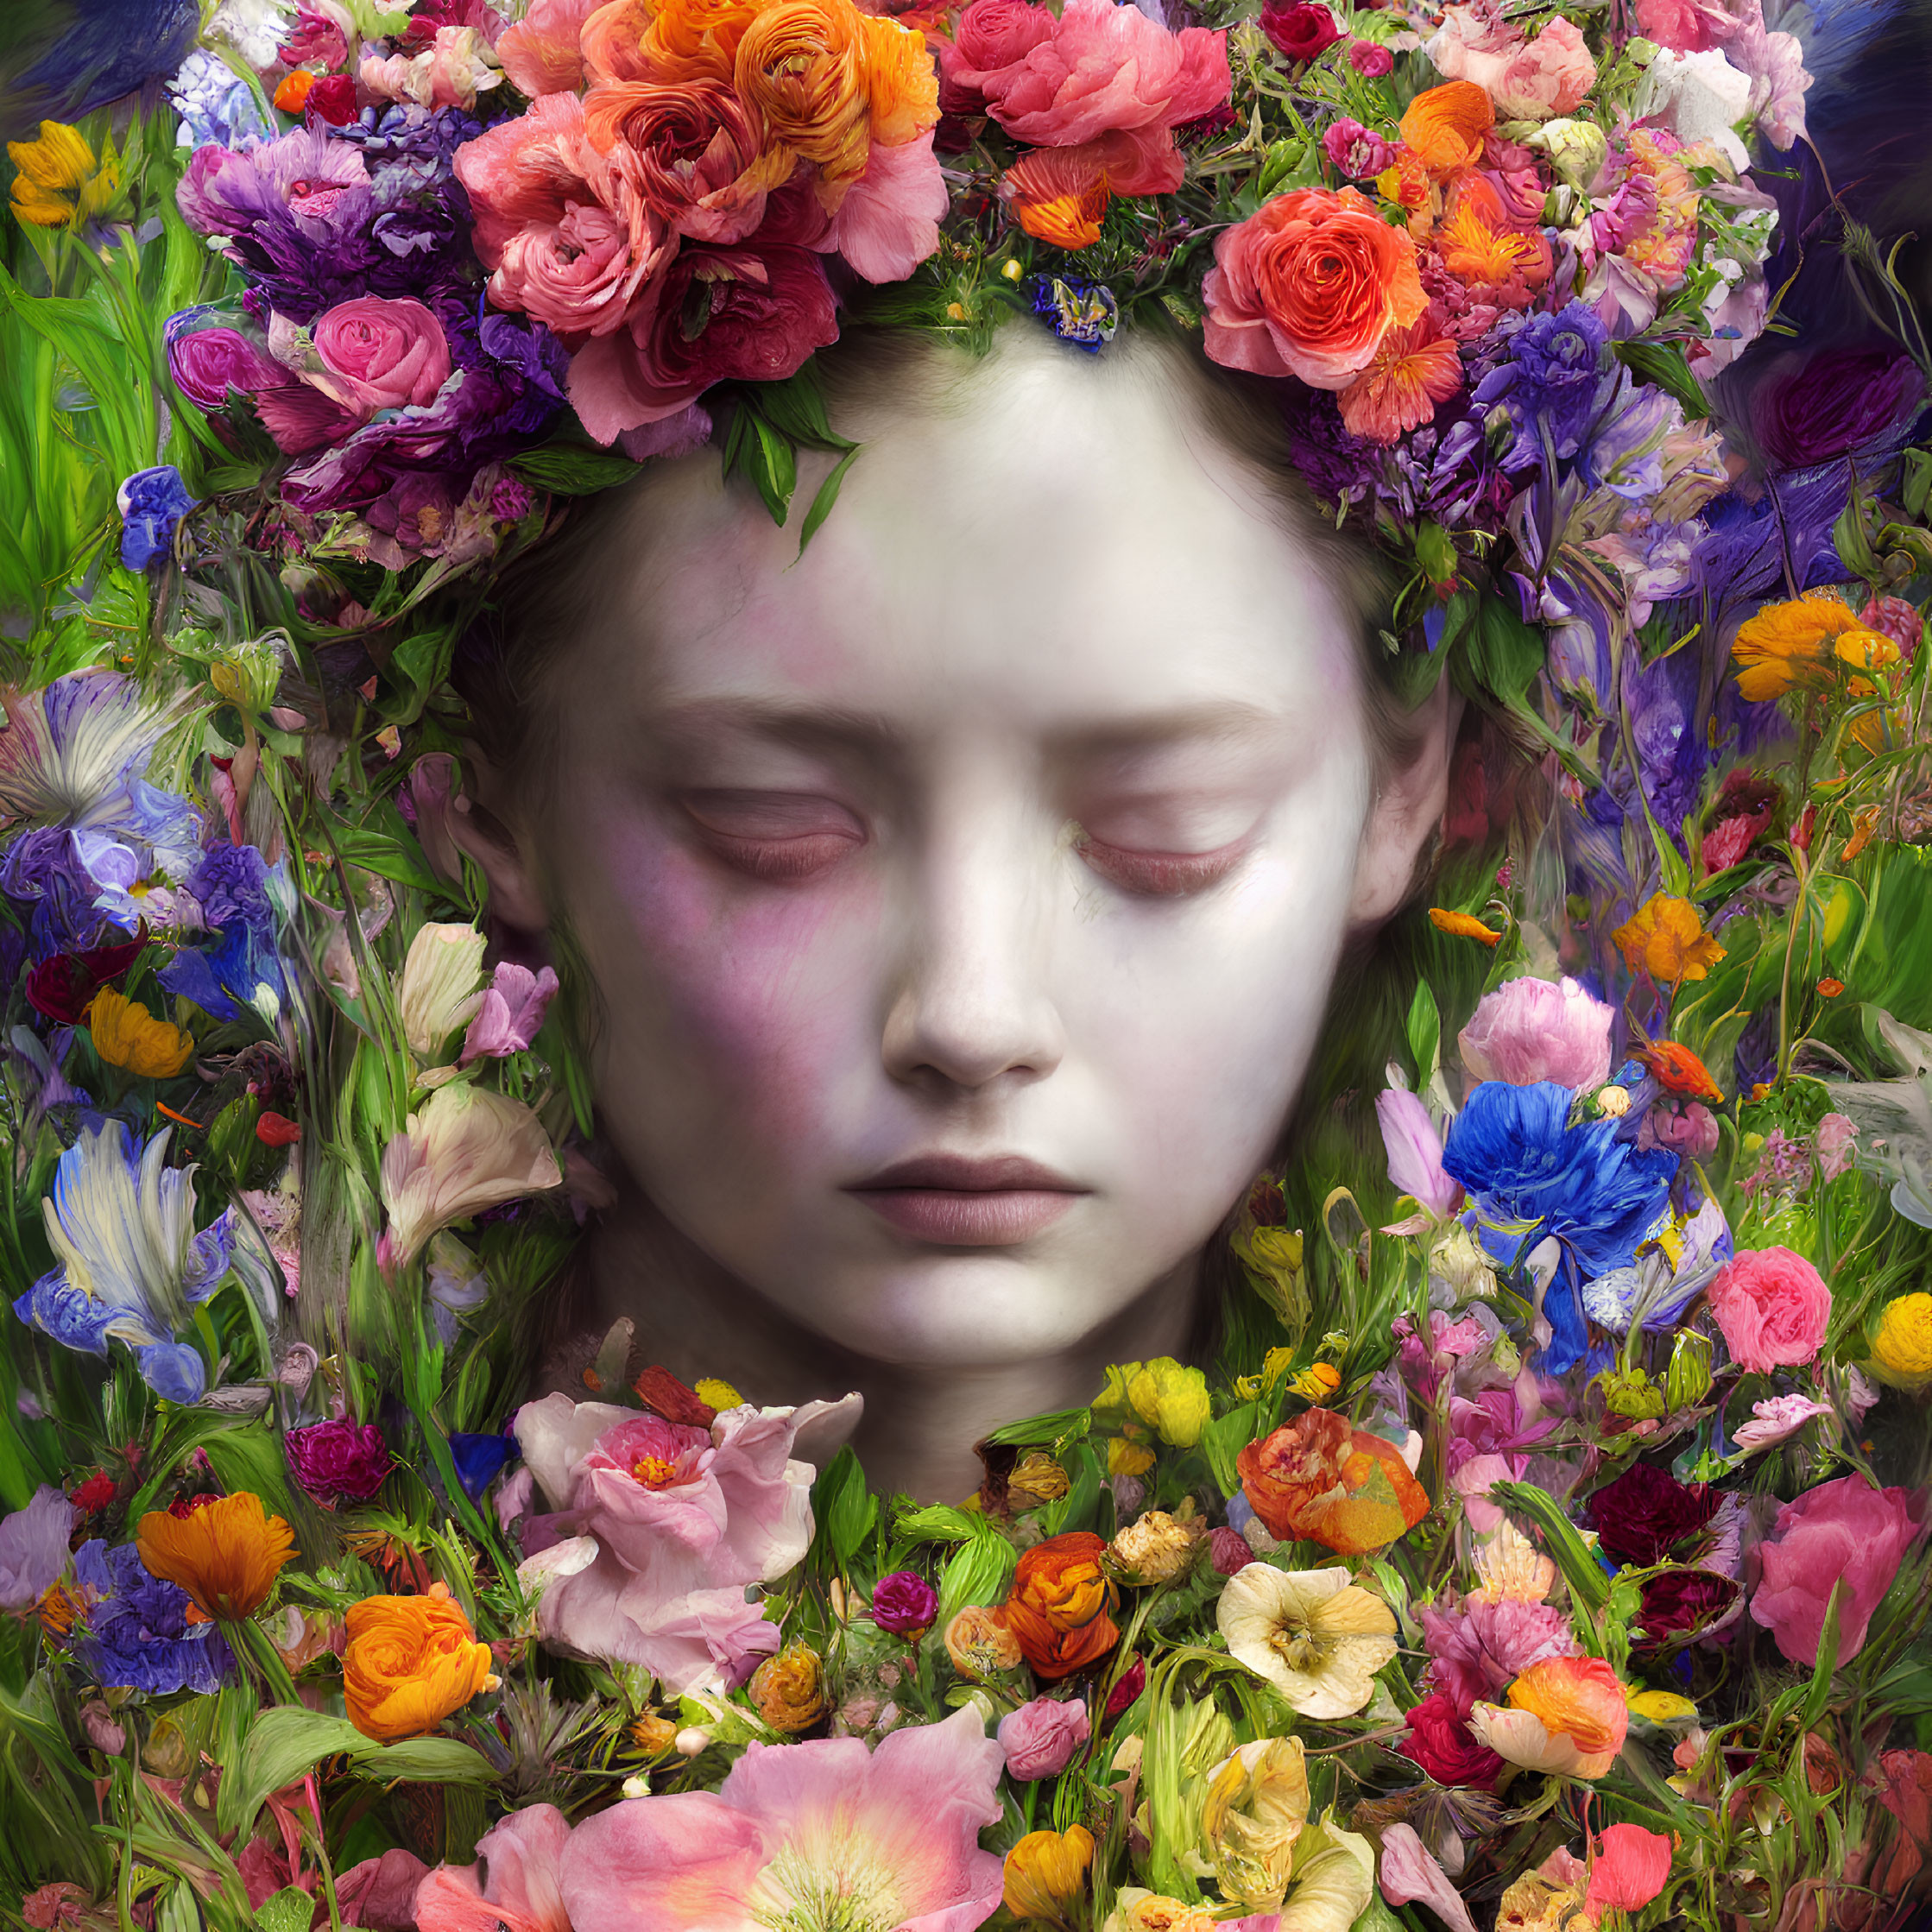 Person with Closed Eyes Surrounded by Vibrant Flowers